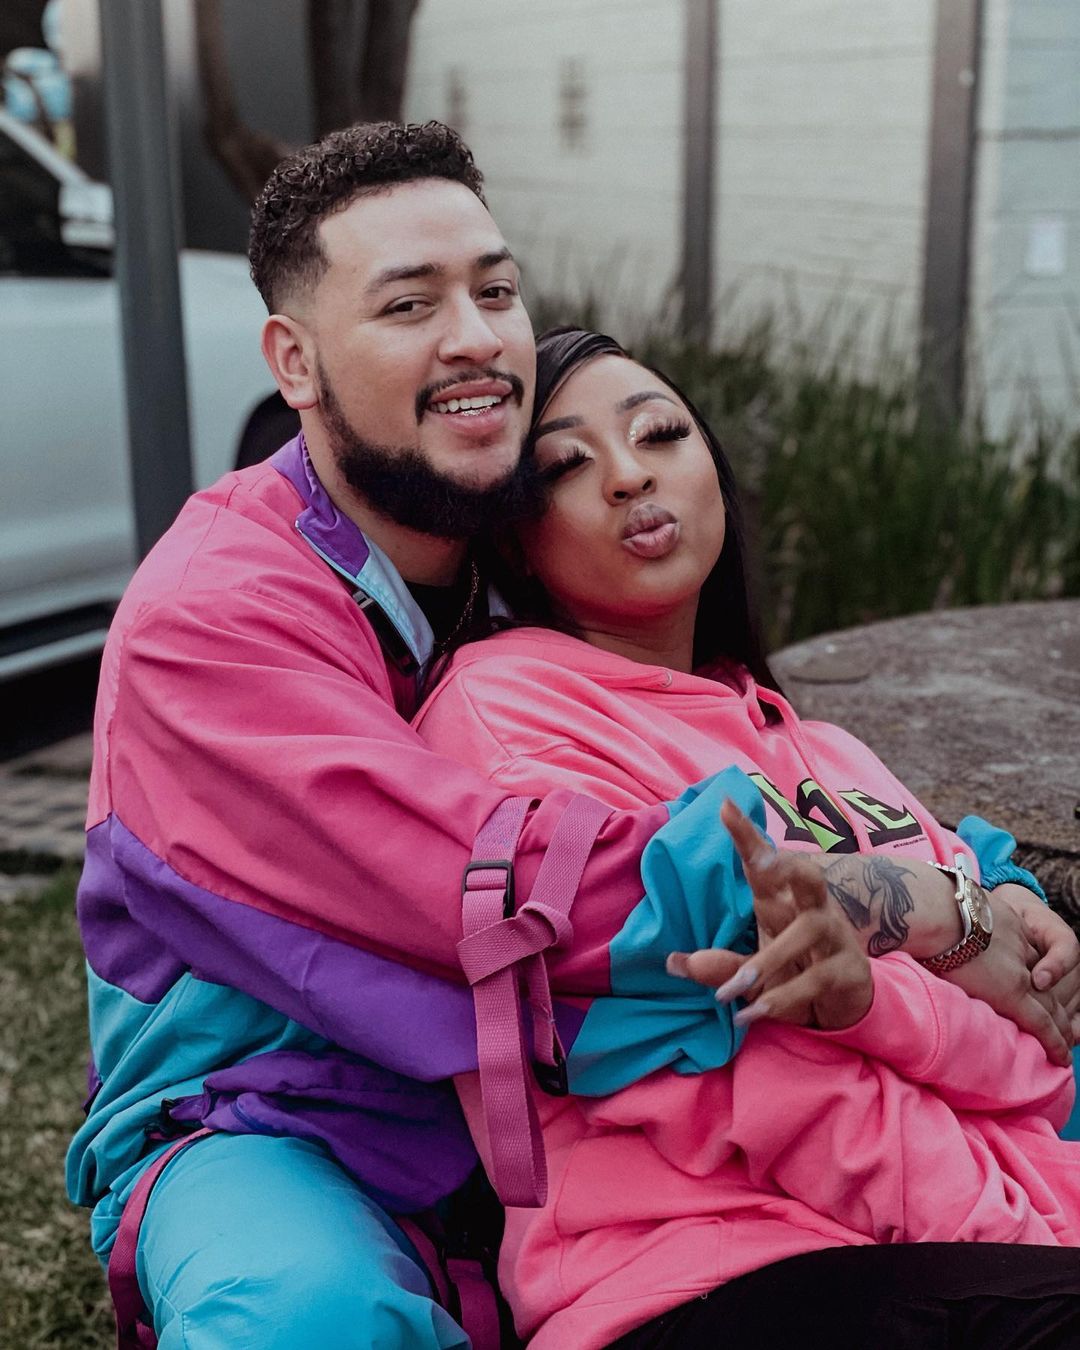 ‘We want a baby’: A look into Nadia Nakai and AKA’s last moments together